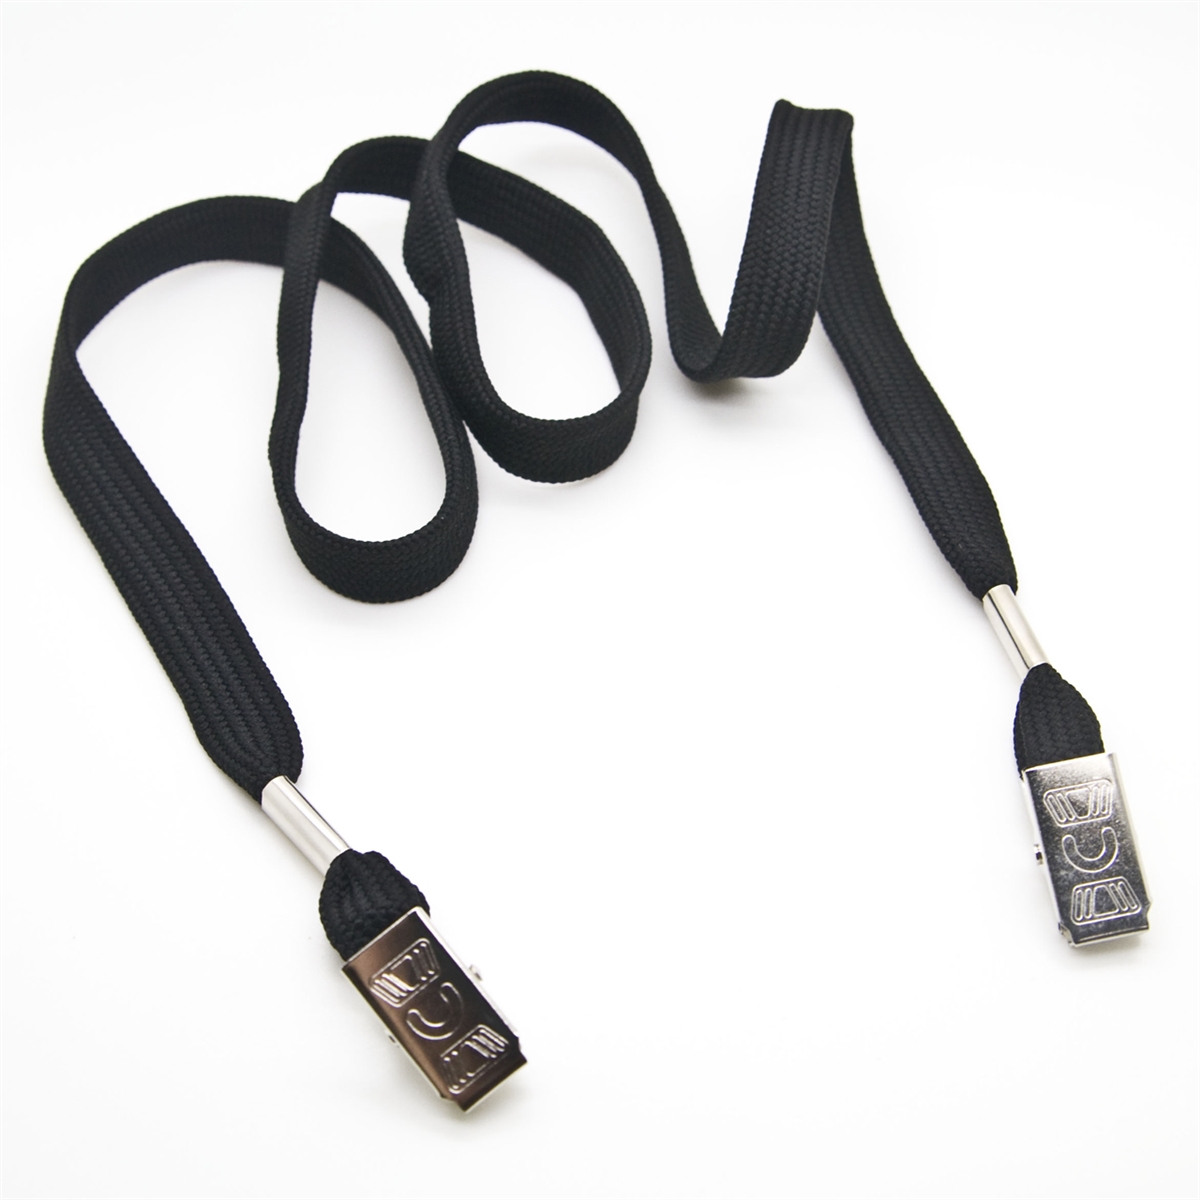 LOT 100 FLAT NECK LANYARD WITH BULLDOG CLIP 6 COLORS AVAILABLE FREE SHIPPING 